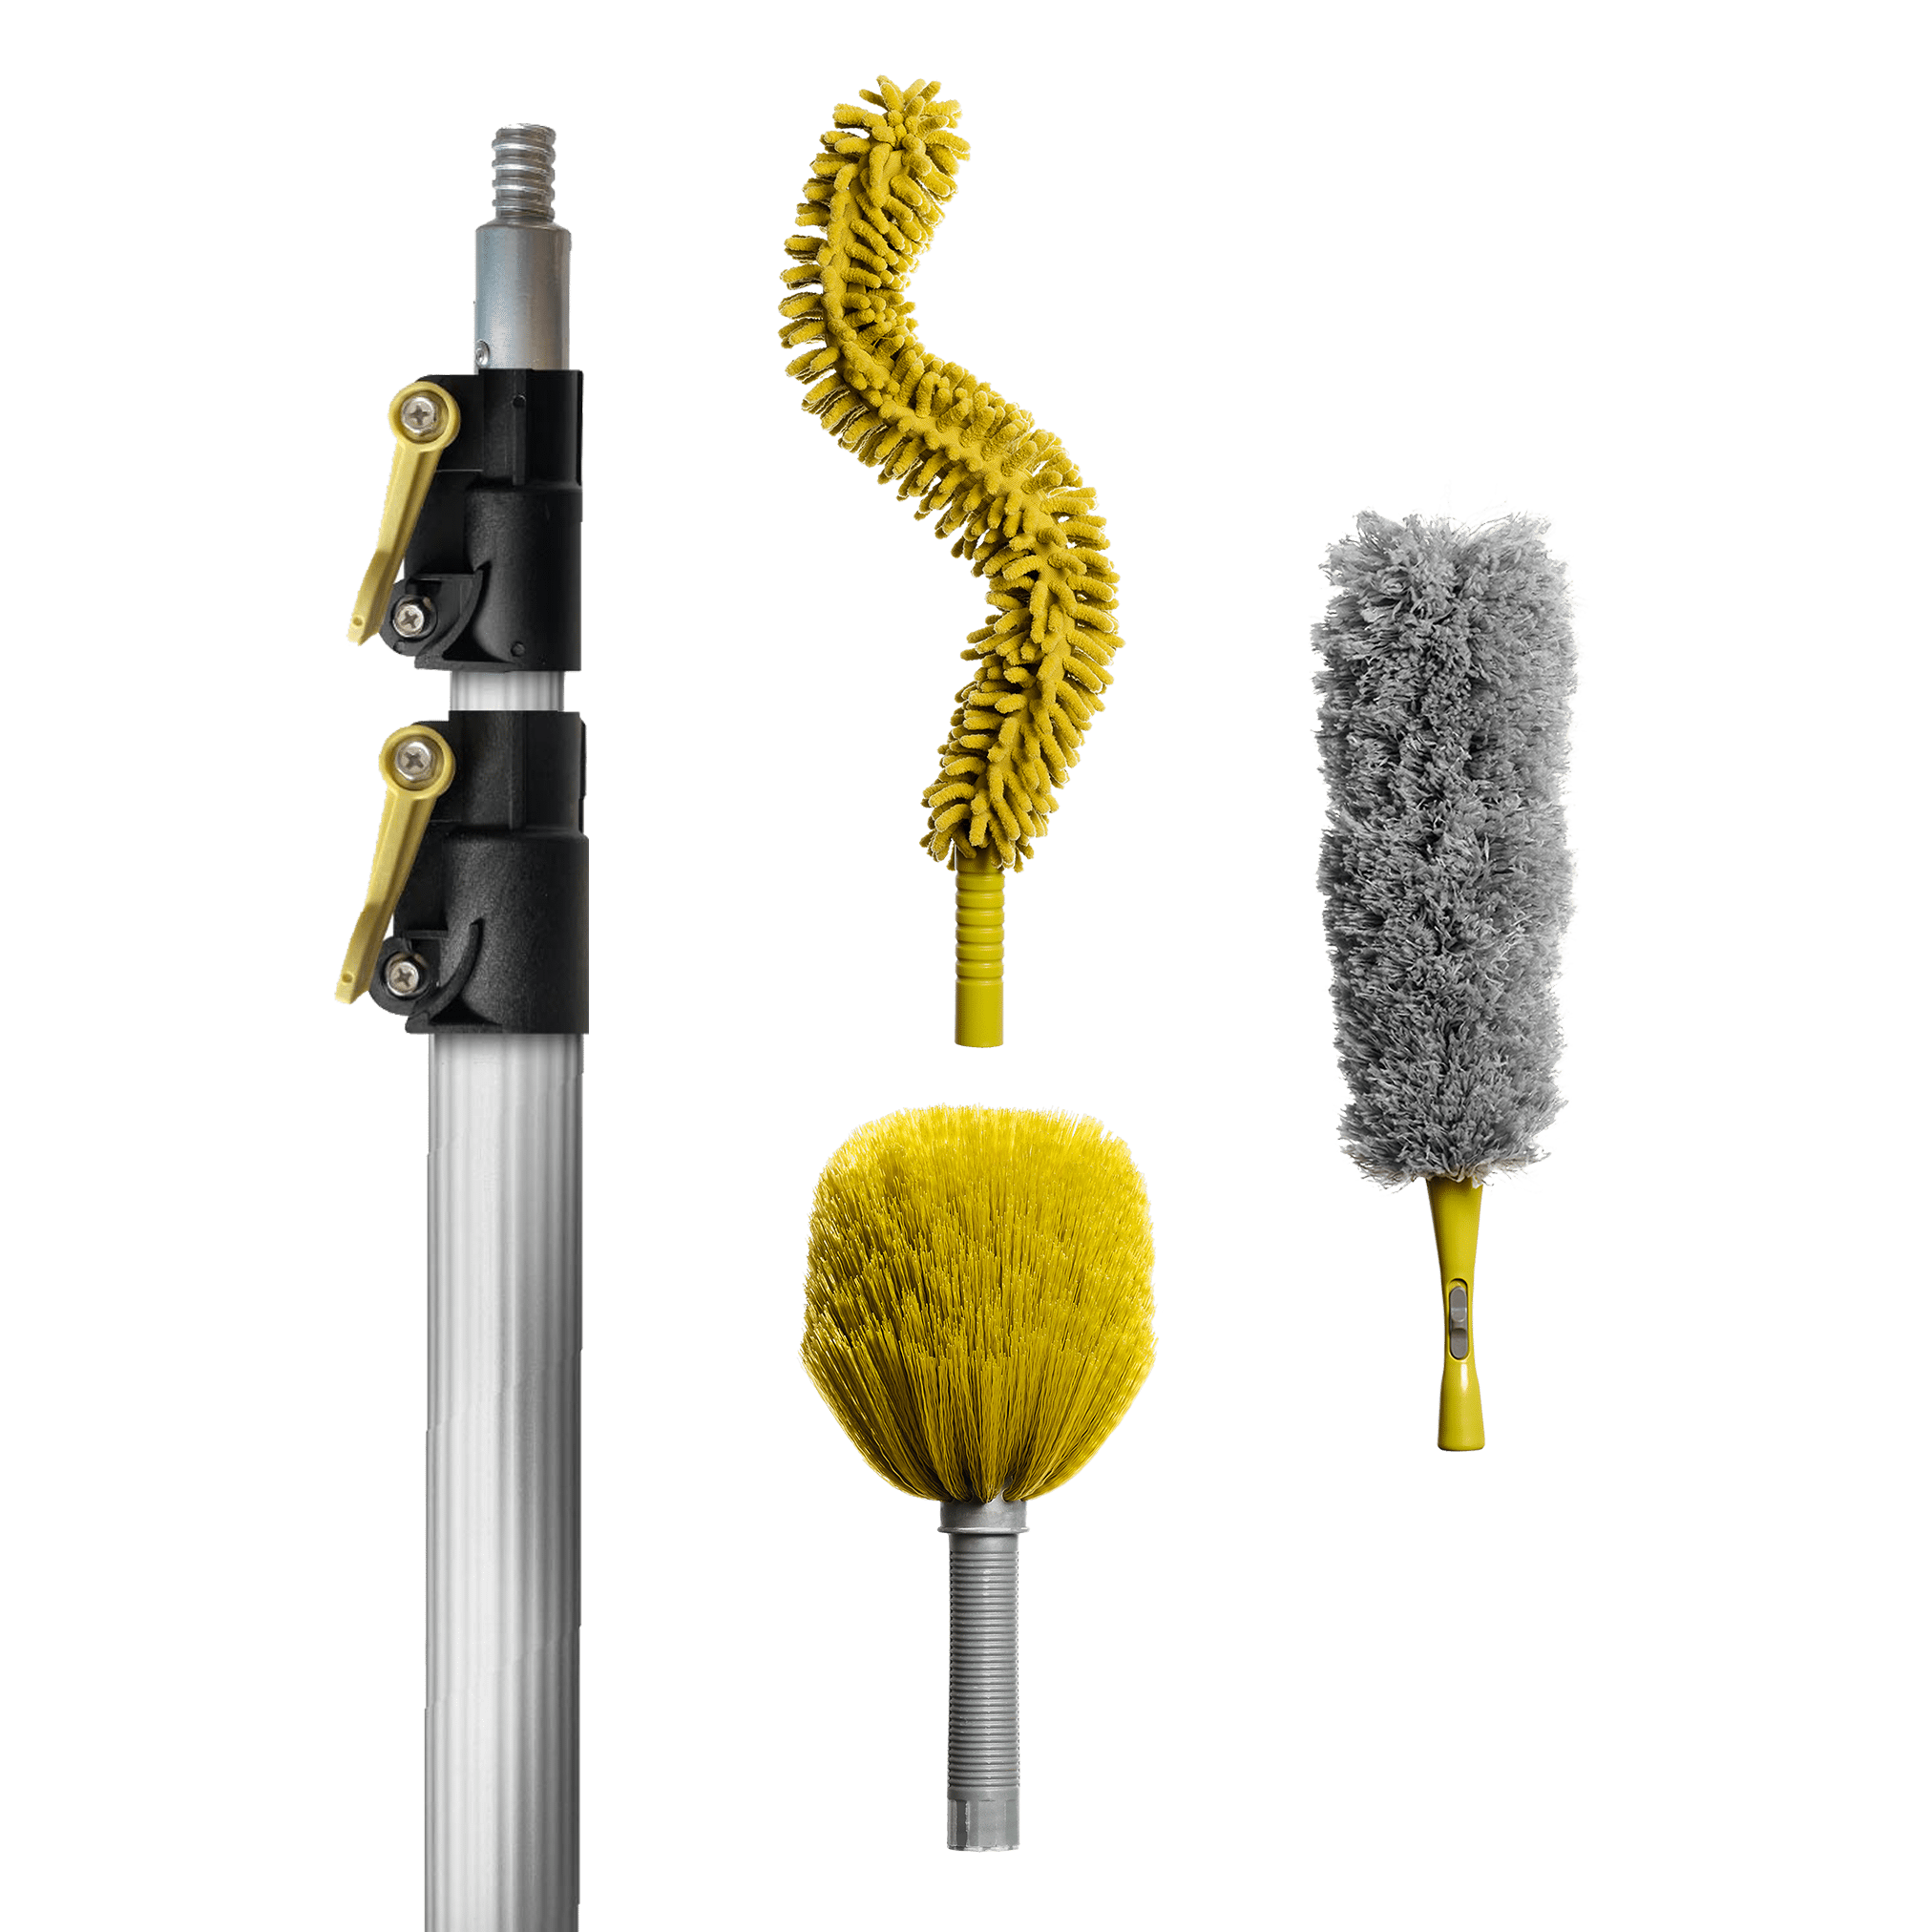 Docapole 20 Foot High Reach Dusting and Cleaning Kit with 5-12 Foot  Extension Pole and Dusting Attachments